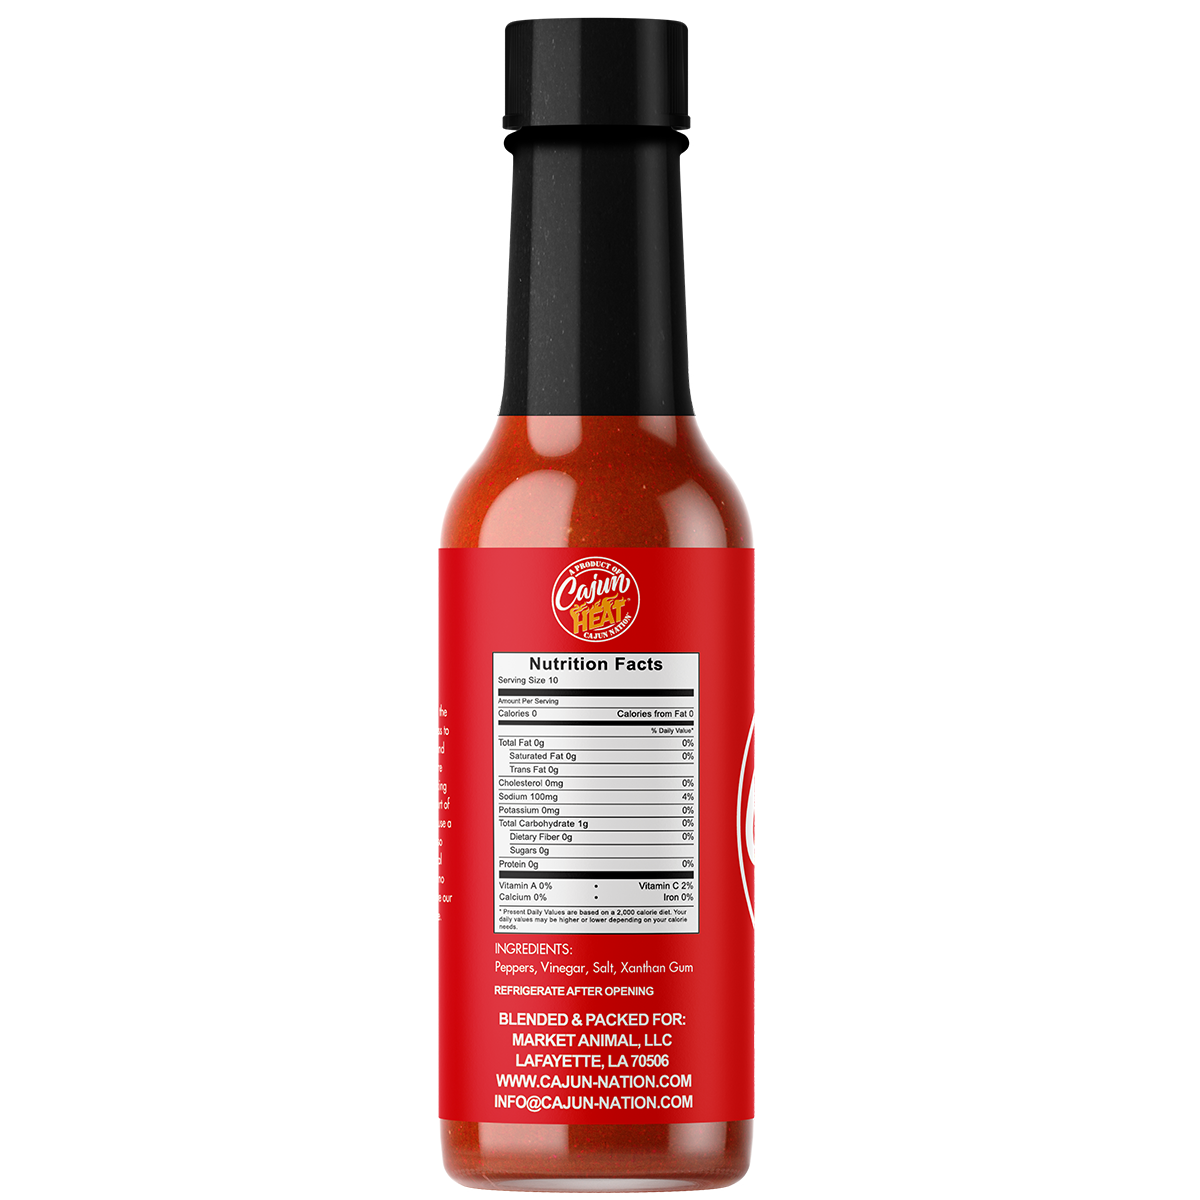 Cajun Heat Louisiana Hot Sauce is a Certified Cajun LOW SODIUM 5 oz flavorful blend of Louisiana Red Peppers with No MSG blended for the Home Chef.  It contains 100mg of sodium. 